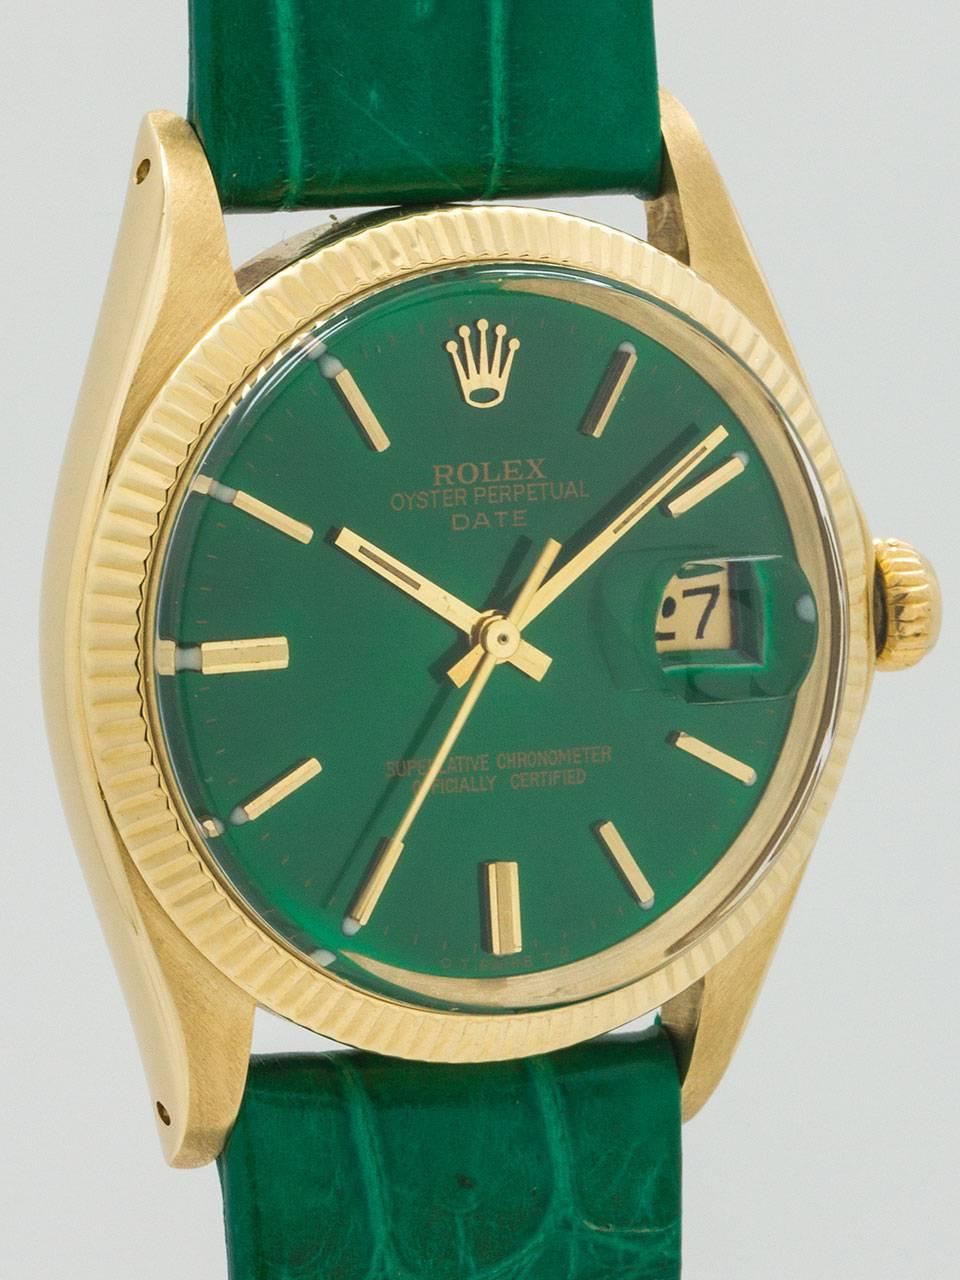 Rolex 14K Yellow Gold Oyster Perpetual Date ref 1503 serial number 3.4 million circa 1972. Featuring 34mm diameter case with smooth bezel and acrylic crystal. Beautiful custom colored “Emerald Green” dial with gold applied indexes and gilt baton